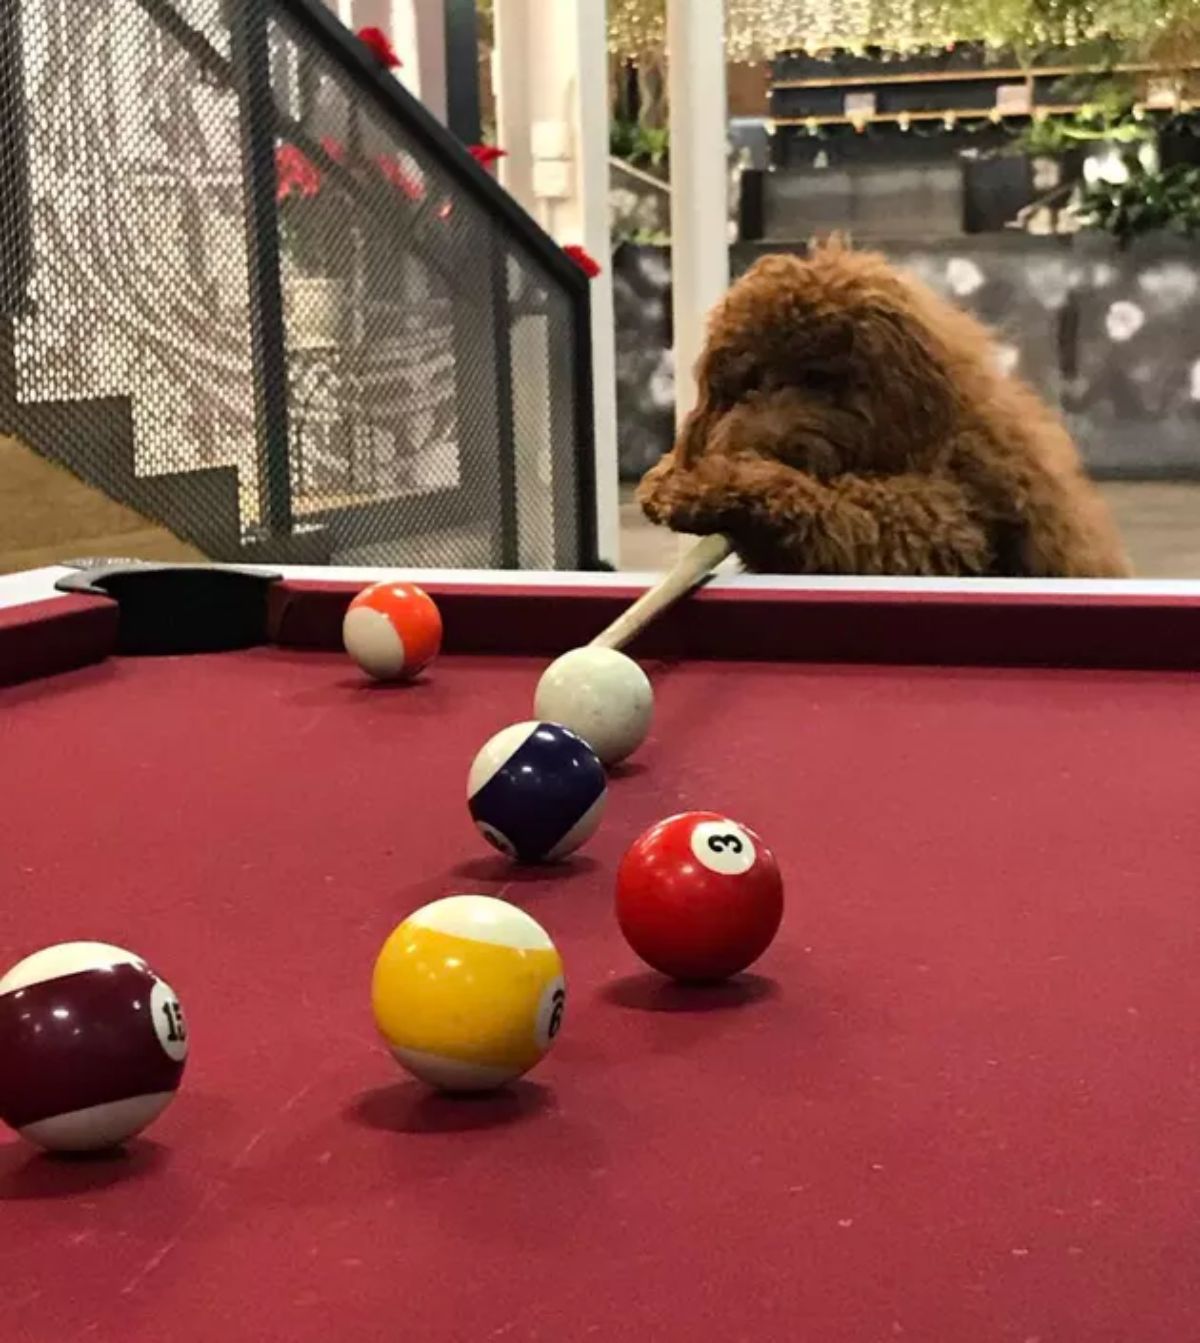 fluffy brown poodle standing on hind legs and holding onto a pool cue on a red pool table